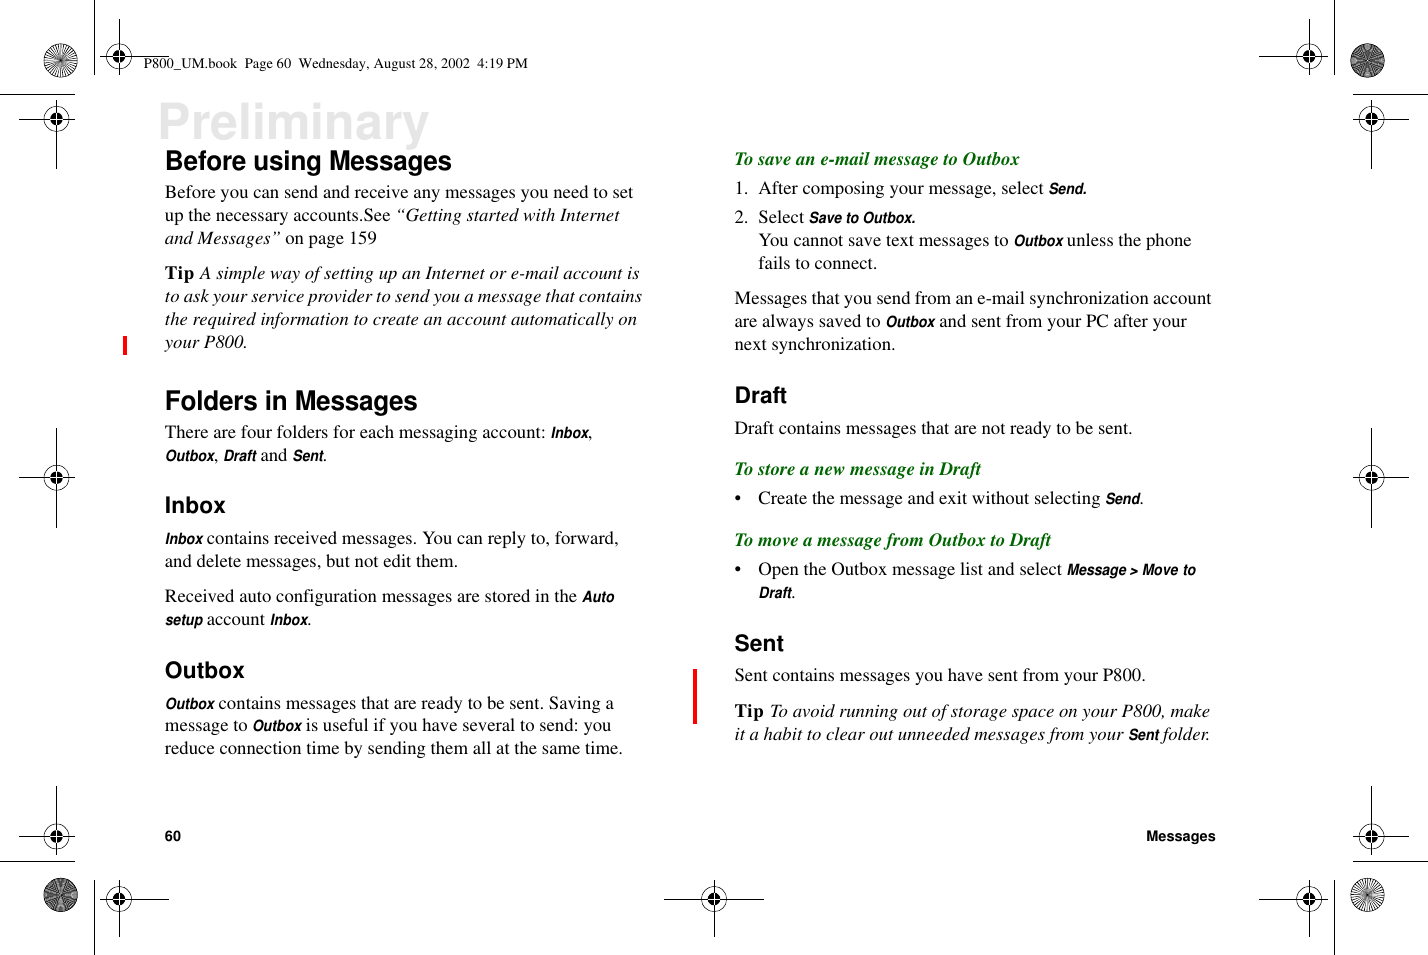 60 MessagesPreliminaryBefore using MessagesBefore you can send and receive any messages you need to setup the necessary accounts.See “Getting started with Internetand Messages” on page 159Tip A simple way of setting up an Internet or e-mail account isto ask your service provider to send you a message that containsthe required information to create an account automatically onyour P800.Folders in MessagesThere are four folders for each messaging account:Inbox,Outbox,DraftandSent.InboxInboxcontains received messages. You can reply to, forward,and delete messages, but not edit them.Received auto configuration messages are stored in theAutosetupaccountInbox.OutboxOutboxcontains messages that are ready to be sent. Saving amessage toOutboxis useful if you have several to send: youreduce connection time by sending them all at the same time.To save an e-mail message to Outbox1. After composing your message, selectSend.2. SelectSave to Outbox.You cannot save text messages toOutboxunless the phonefails to connect.Messages that you send from an e-mail synchronization accountare always saved toOutboxand sent from your PC after yournext synchronization.DraftDraft contains messages that are not ready to be sent.To store a new message in Draft• Create the message and exit without selectingSend.To move a message from Outbox to Draft• Open the Outbox message list and selectMessage &gt; Move toDraft.SentSent contains messages you have sent from your P800.Tip To avoid running out of storage space on your P800, makeit a habit to clear out unneeded messages from yourSentfolder.P800_UM.book Page 60 Wednesday, August 28, 2002 4:19 PM